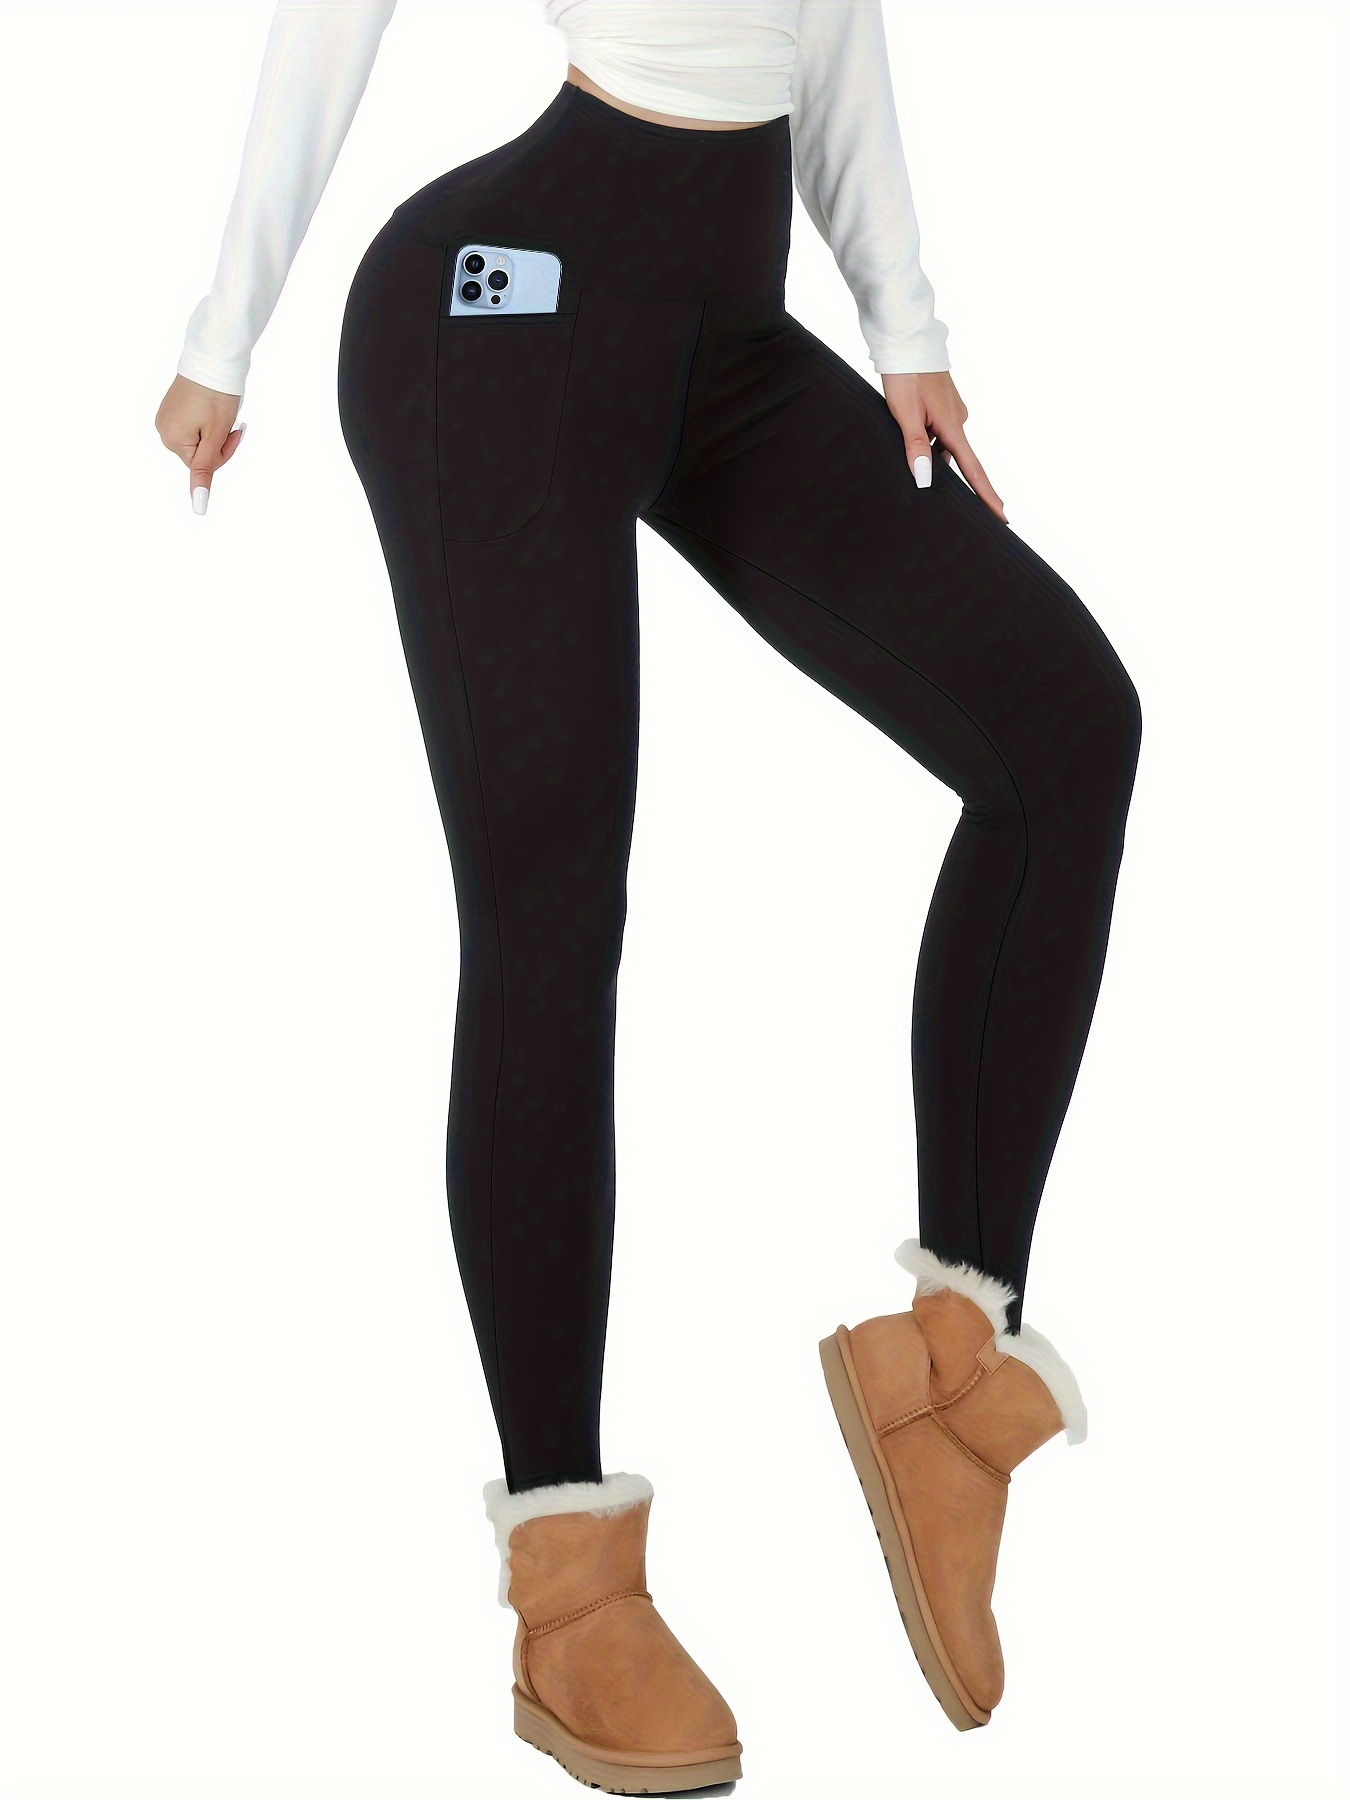 Ladies Thermal Leggings Thick Winter Fleece Lined Warm-Large